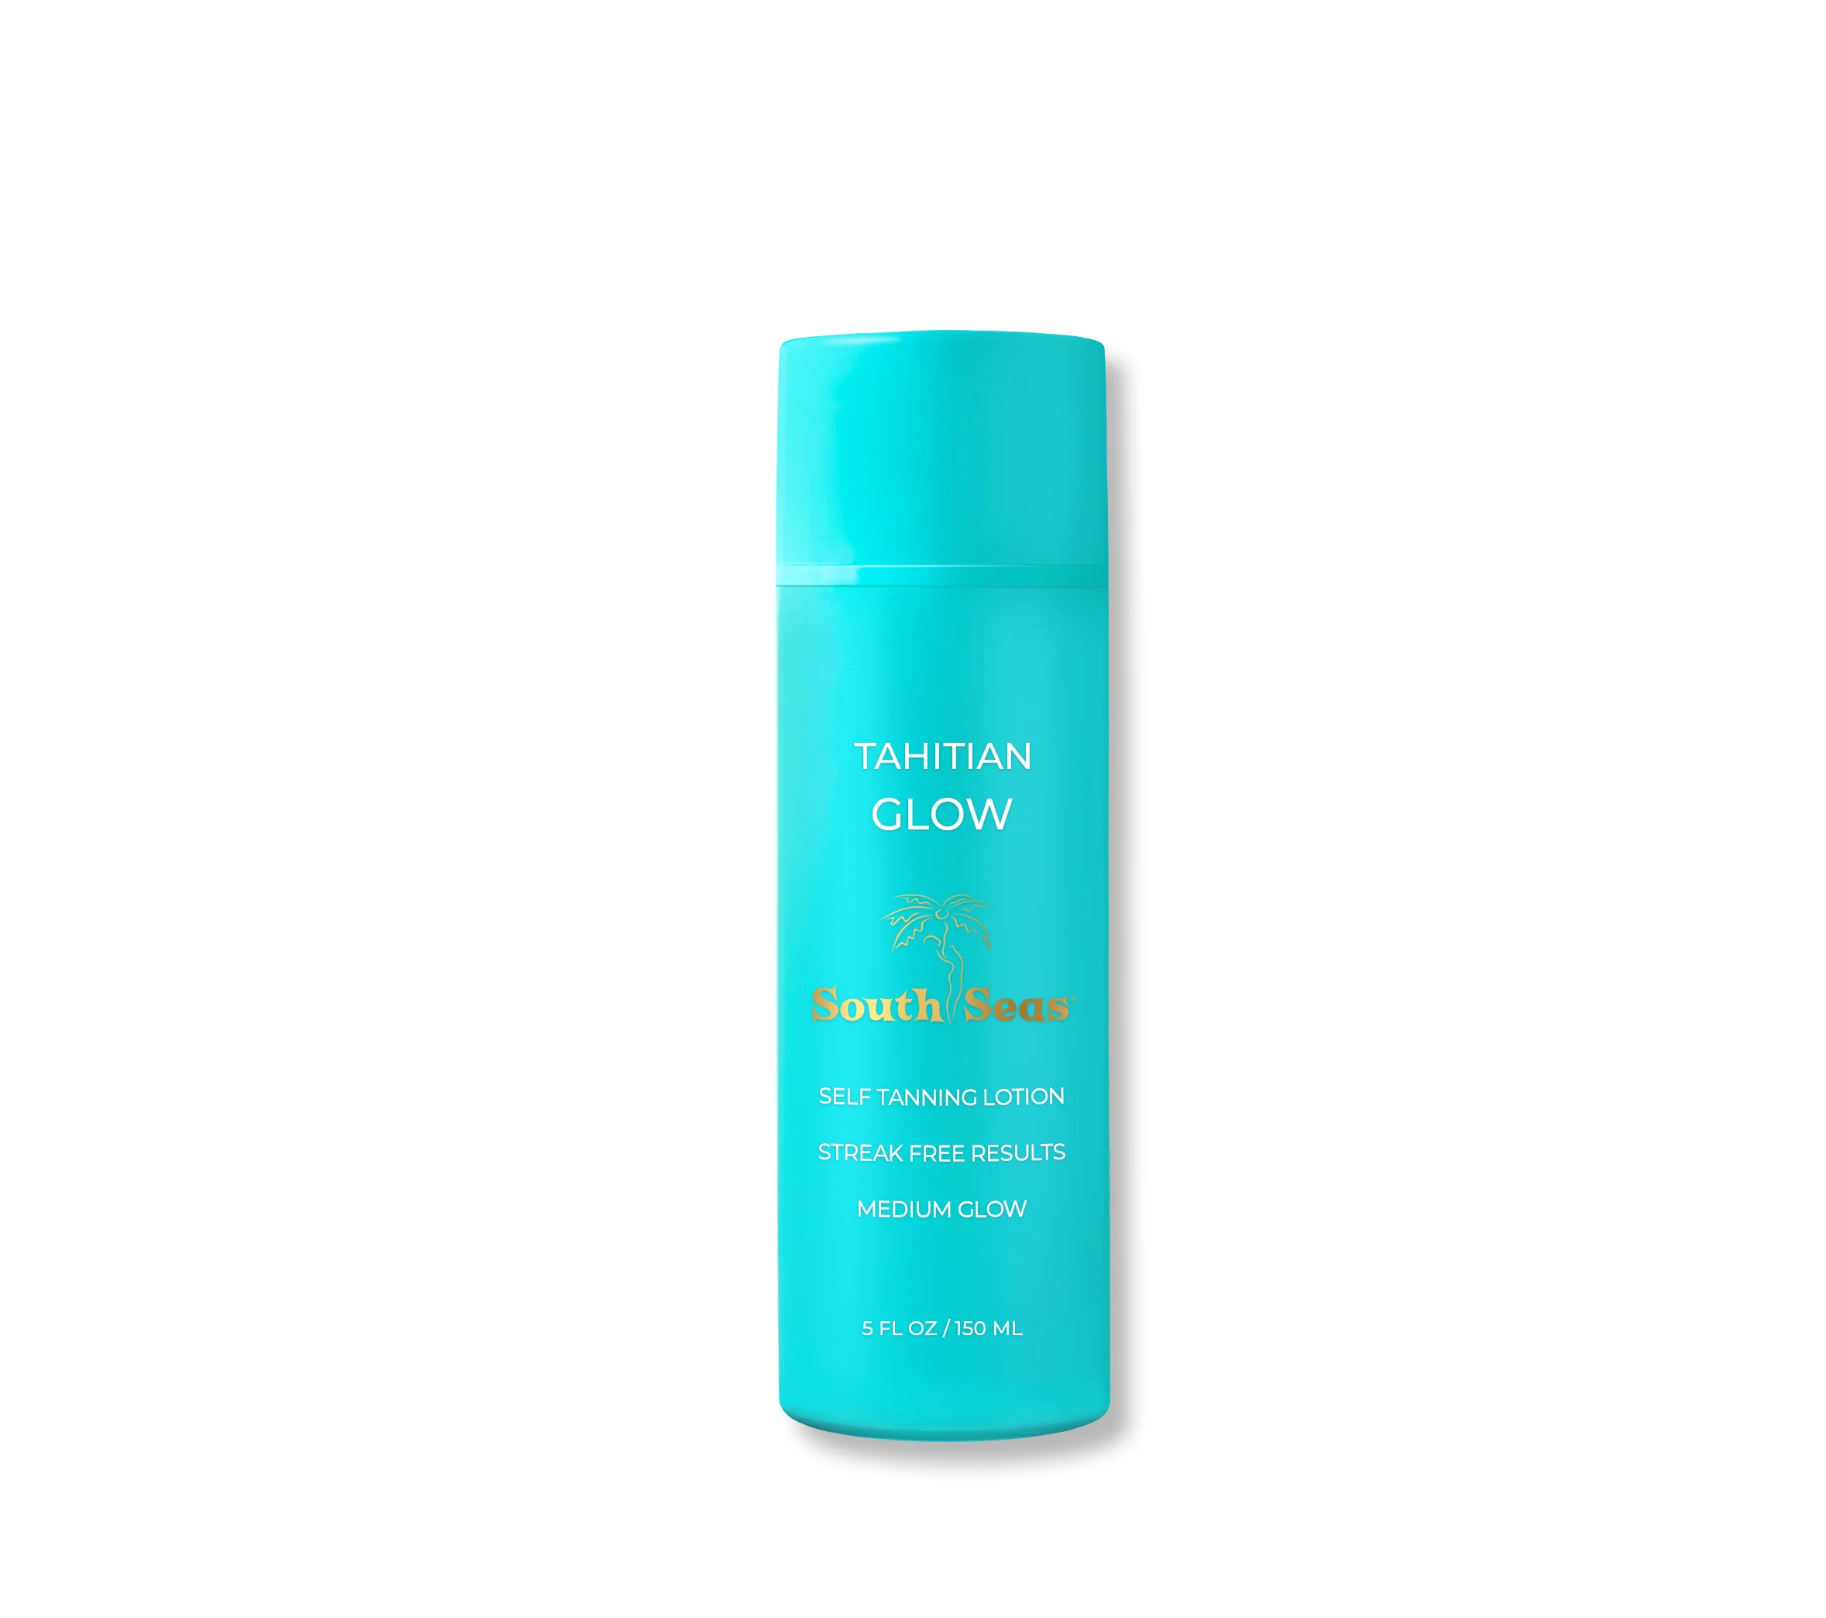 A turquoise bottle of Tahitian Glow 5oz self-tanning lotion by South Seas Skincare. The cylindrical container has a screw cap and features text that reads "Streak Free Results" and "Medium Glow." Infused with organic DHA for a natural, tropical tan, the bottle contains 5 fl oz (150 ml) of lotion.